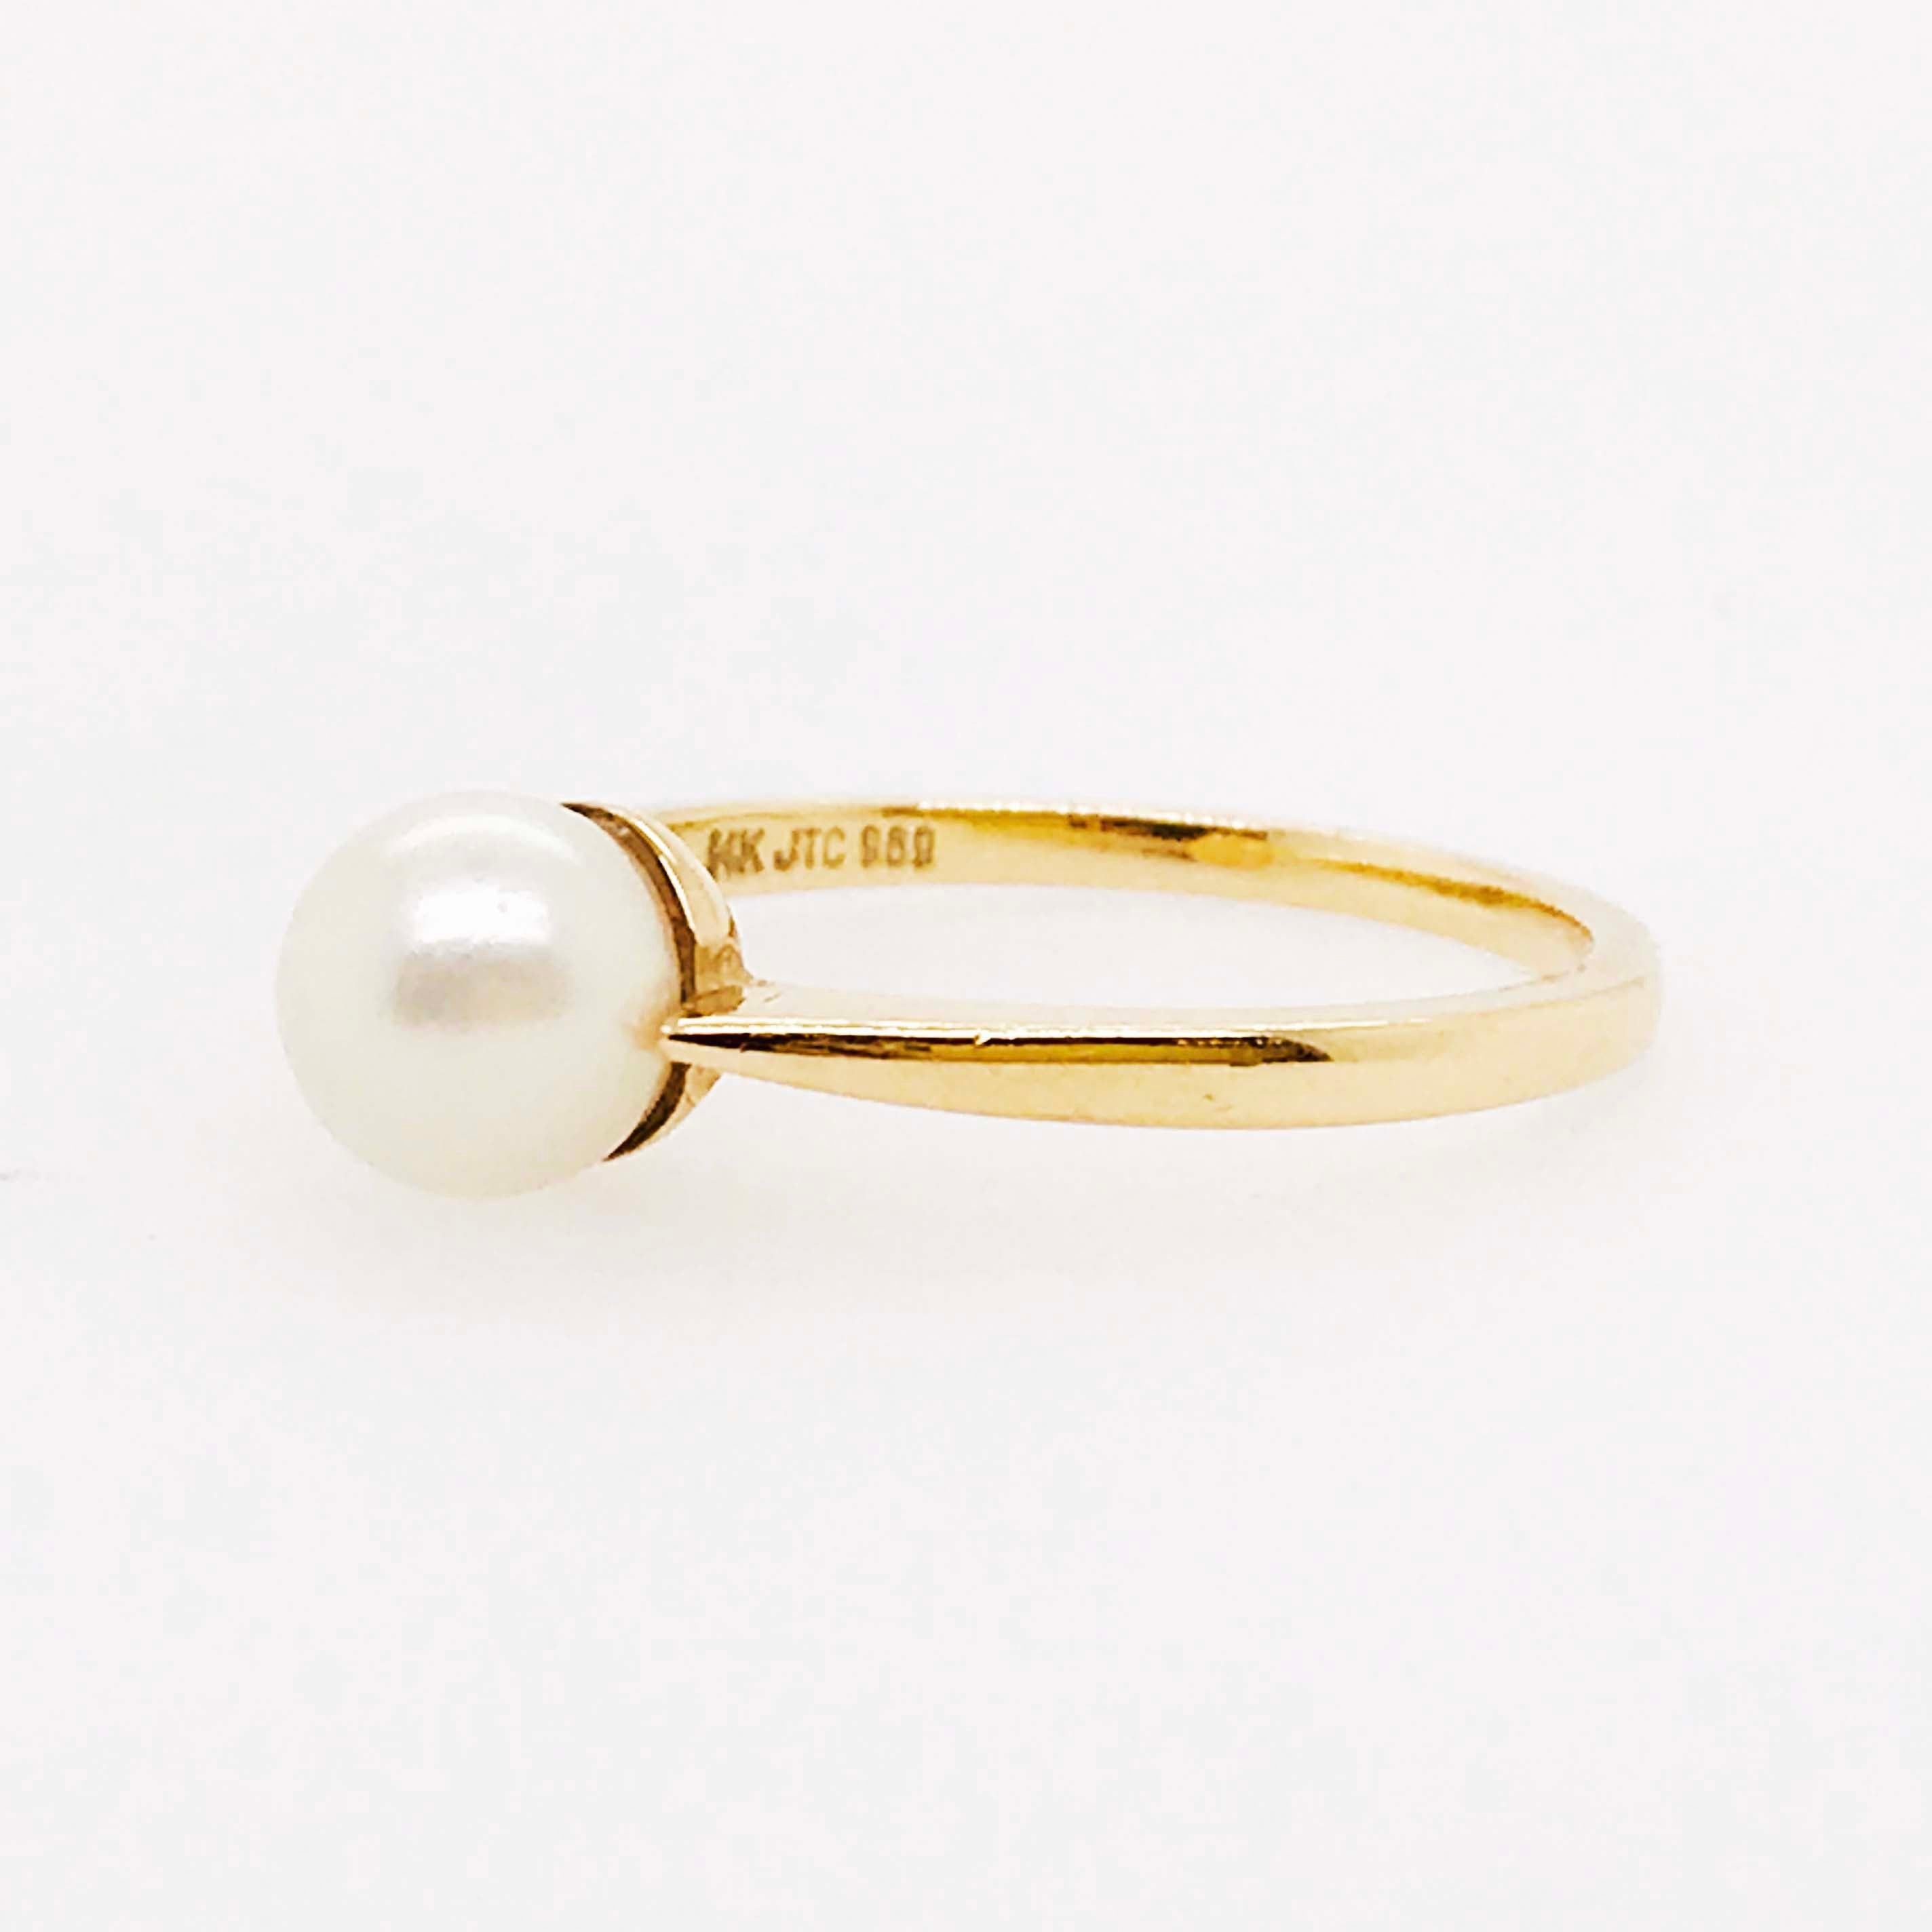 Akoya Pearl Solitaire Ring with Genuine Round Akoya Pearl in 14 Karat Gold 5